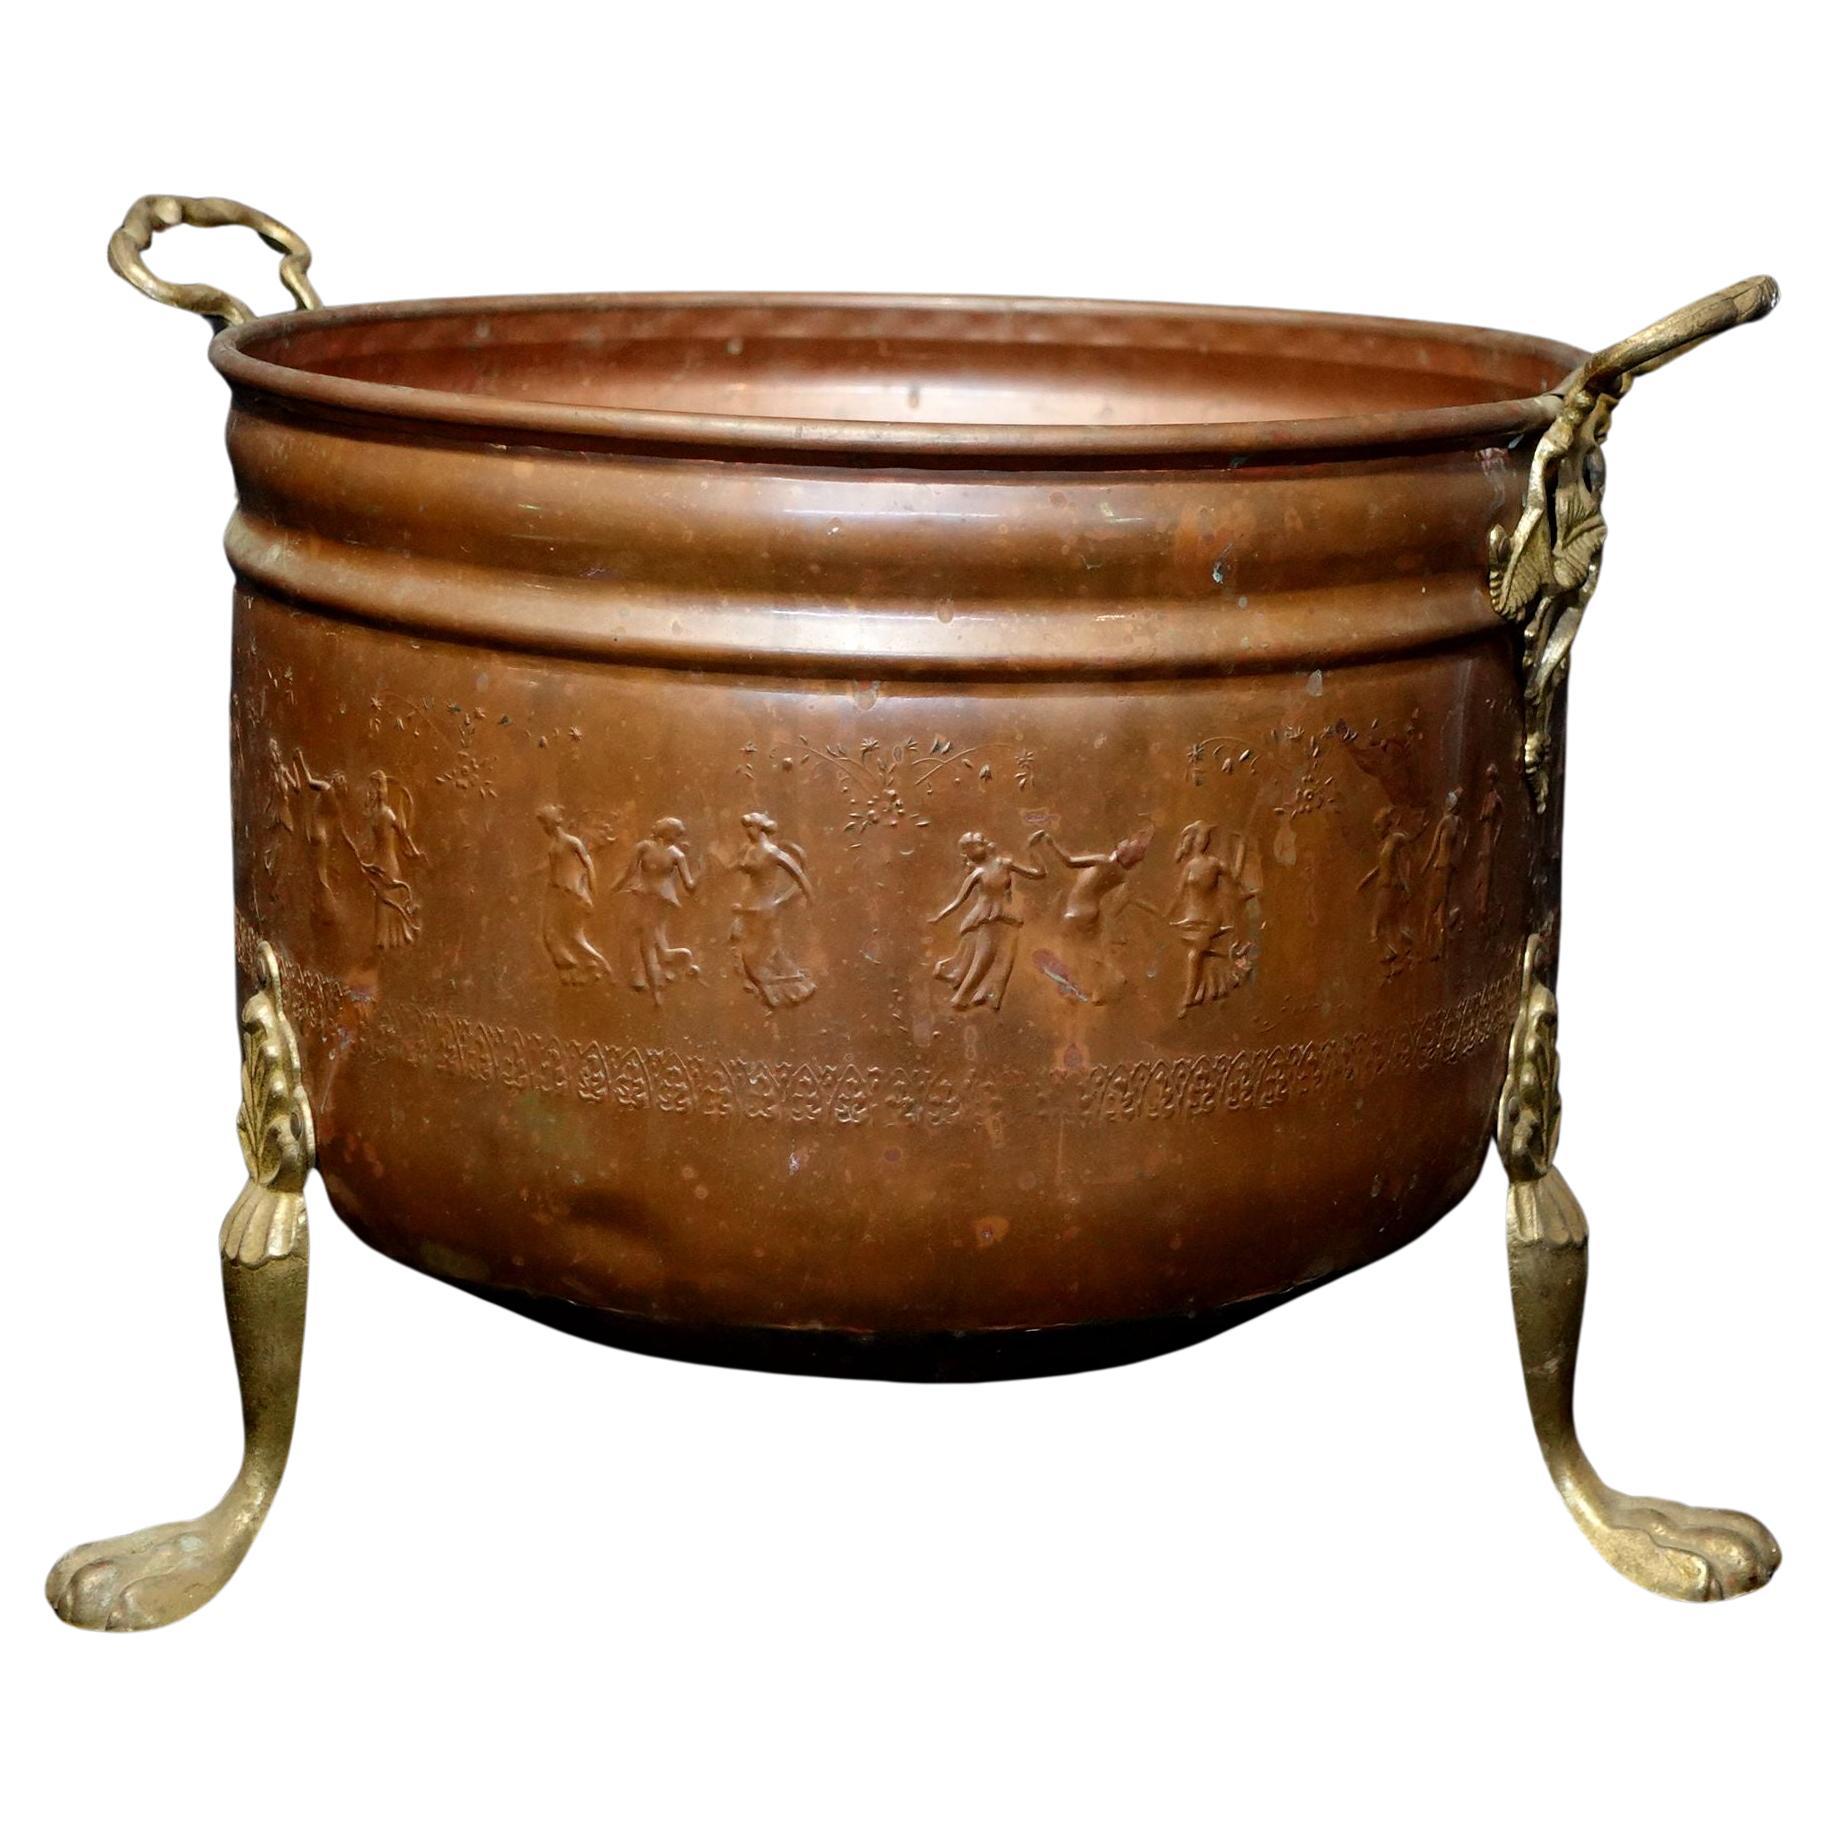  Old and Large Hand Hammered Footed Solid Copper/Brass Bucket w/Repousse Figures